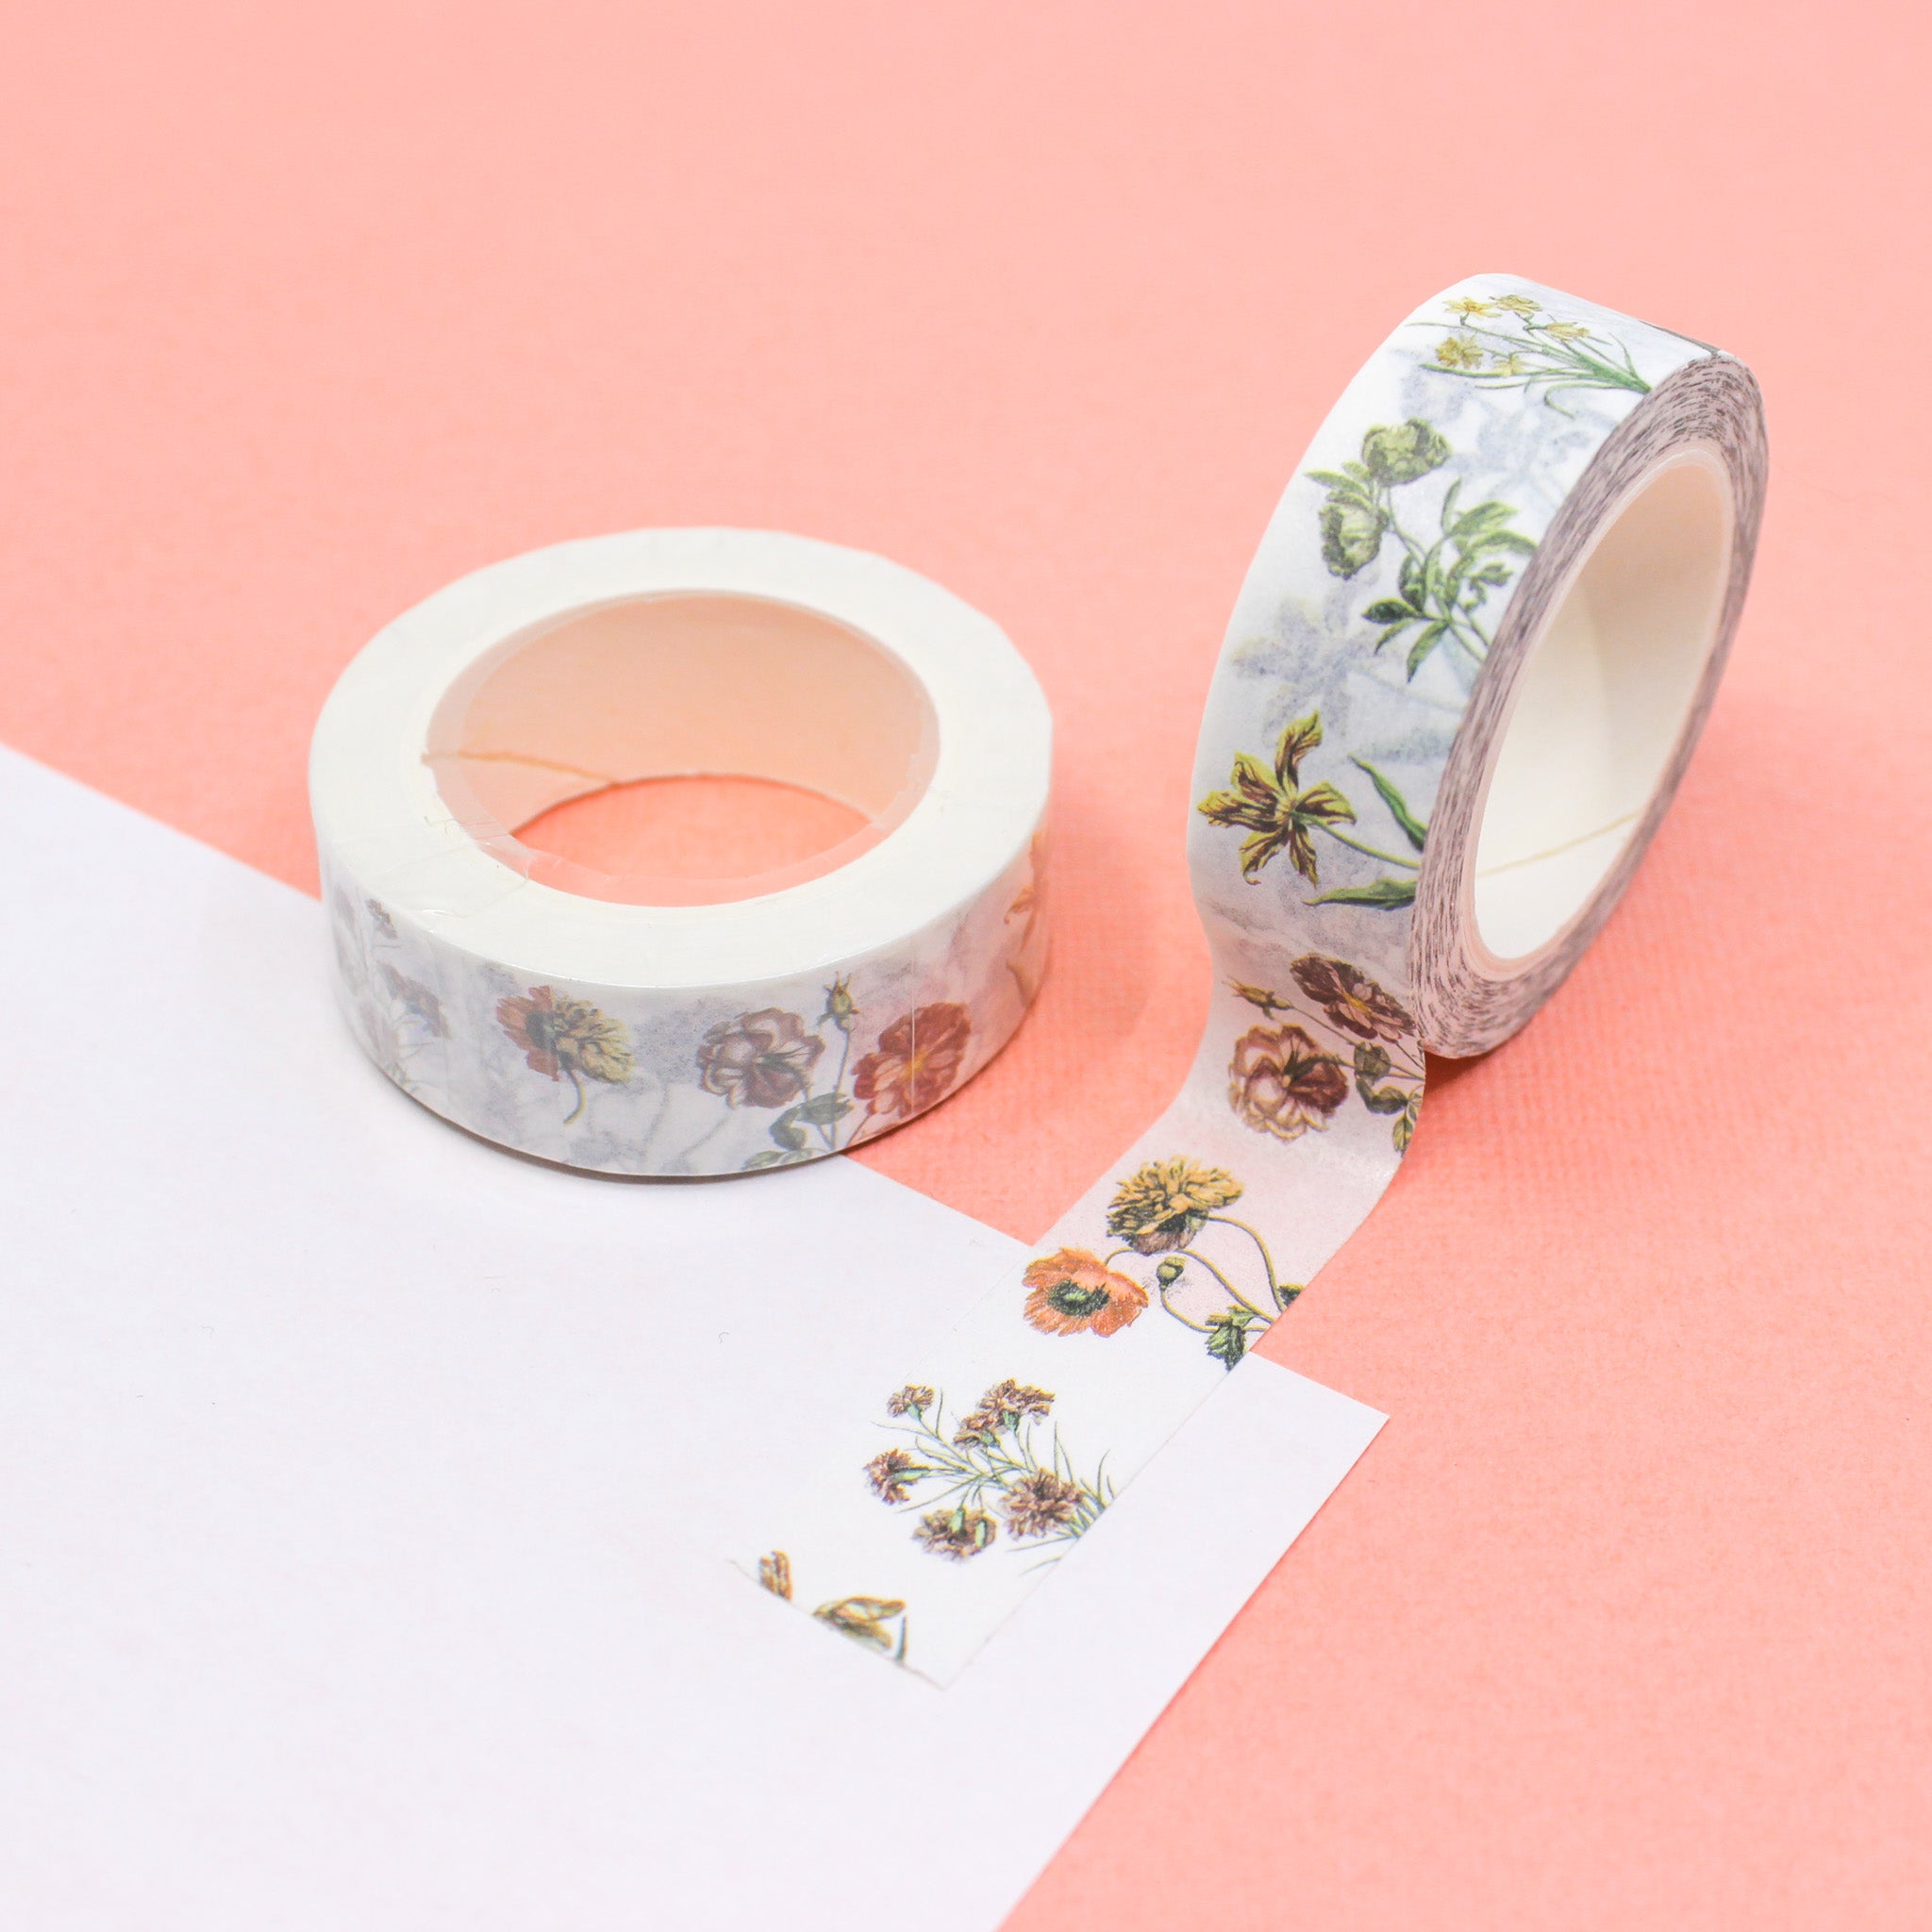 This is a simple botanical flowers pattern washi tape from BBB Supplies Craft Shop